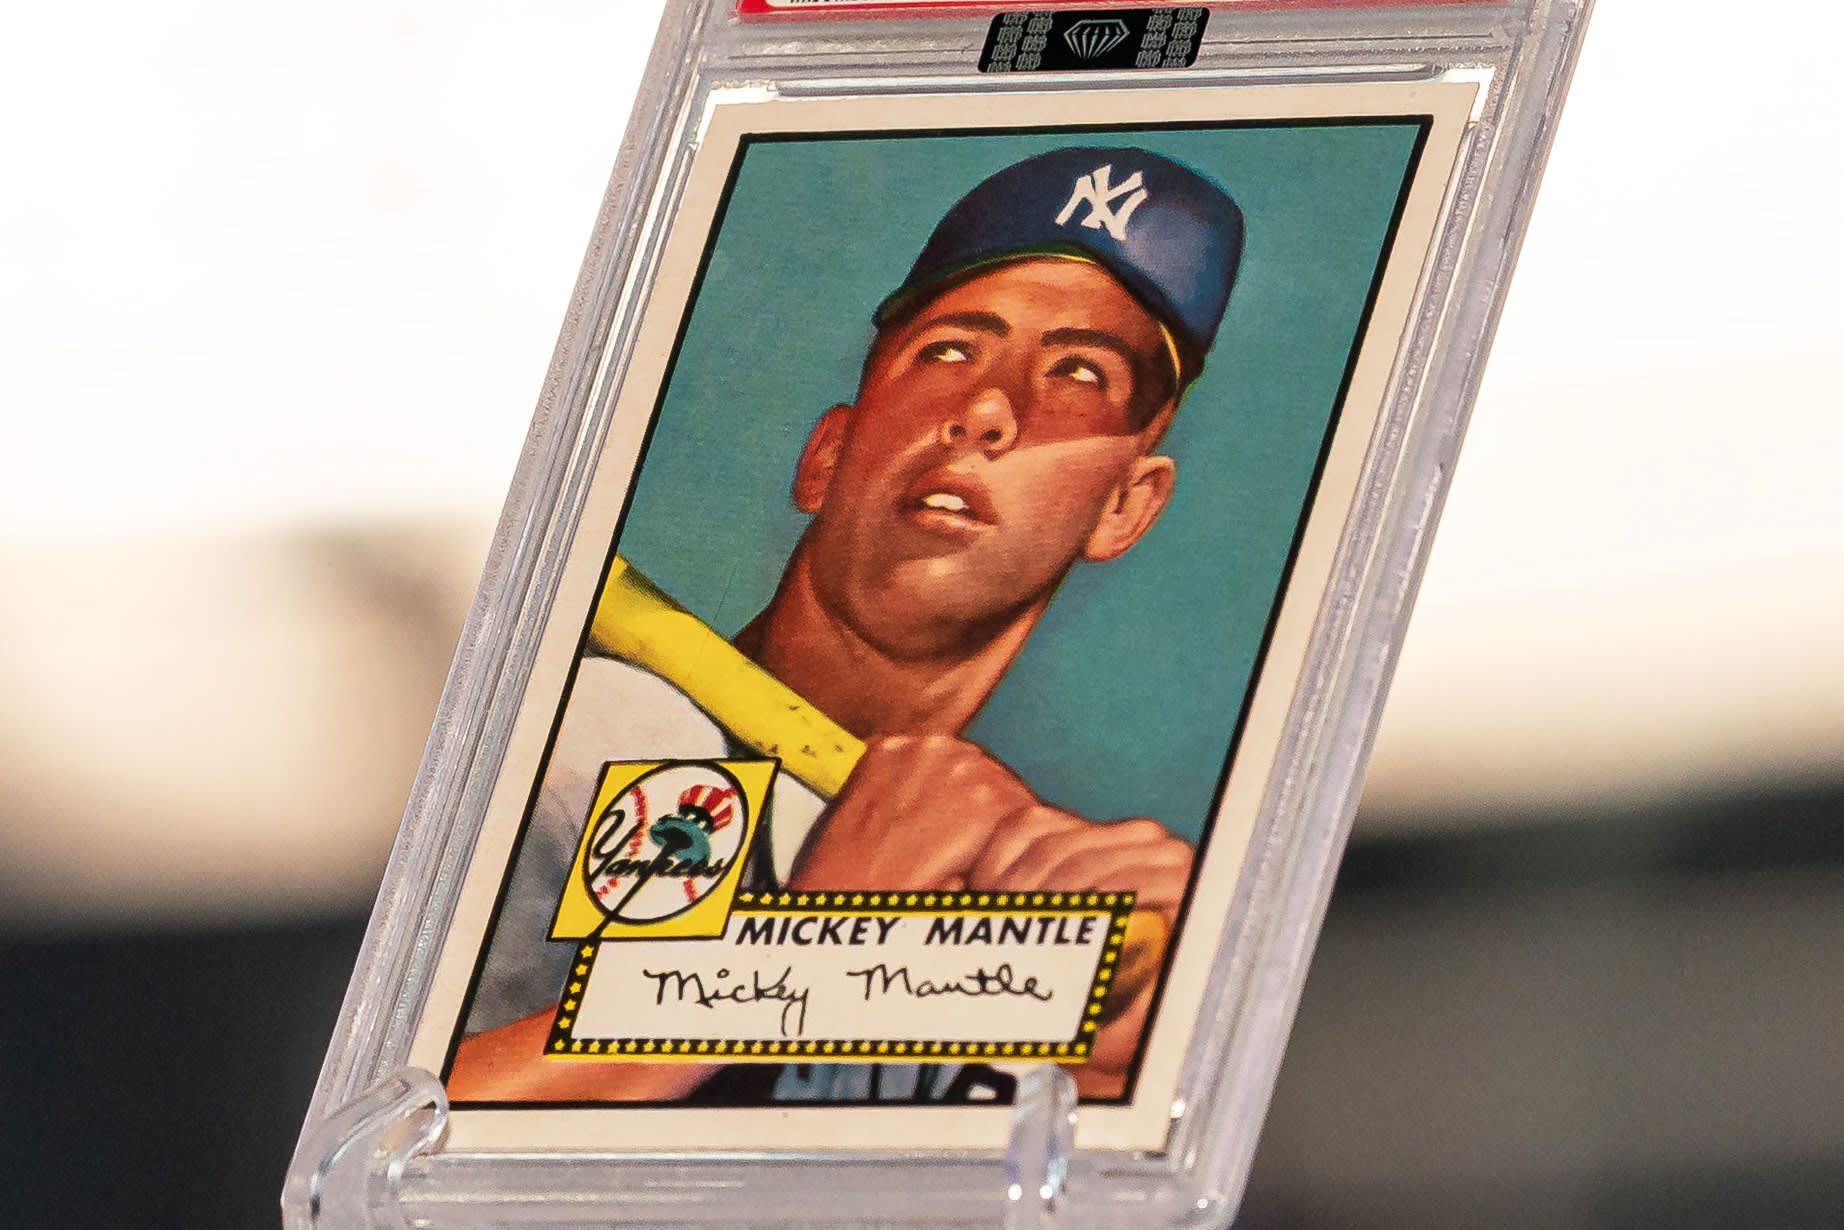 Major League Baseball ends 70-year deal with Topps, Fanatics Gets Trading Card Deal